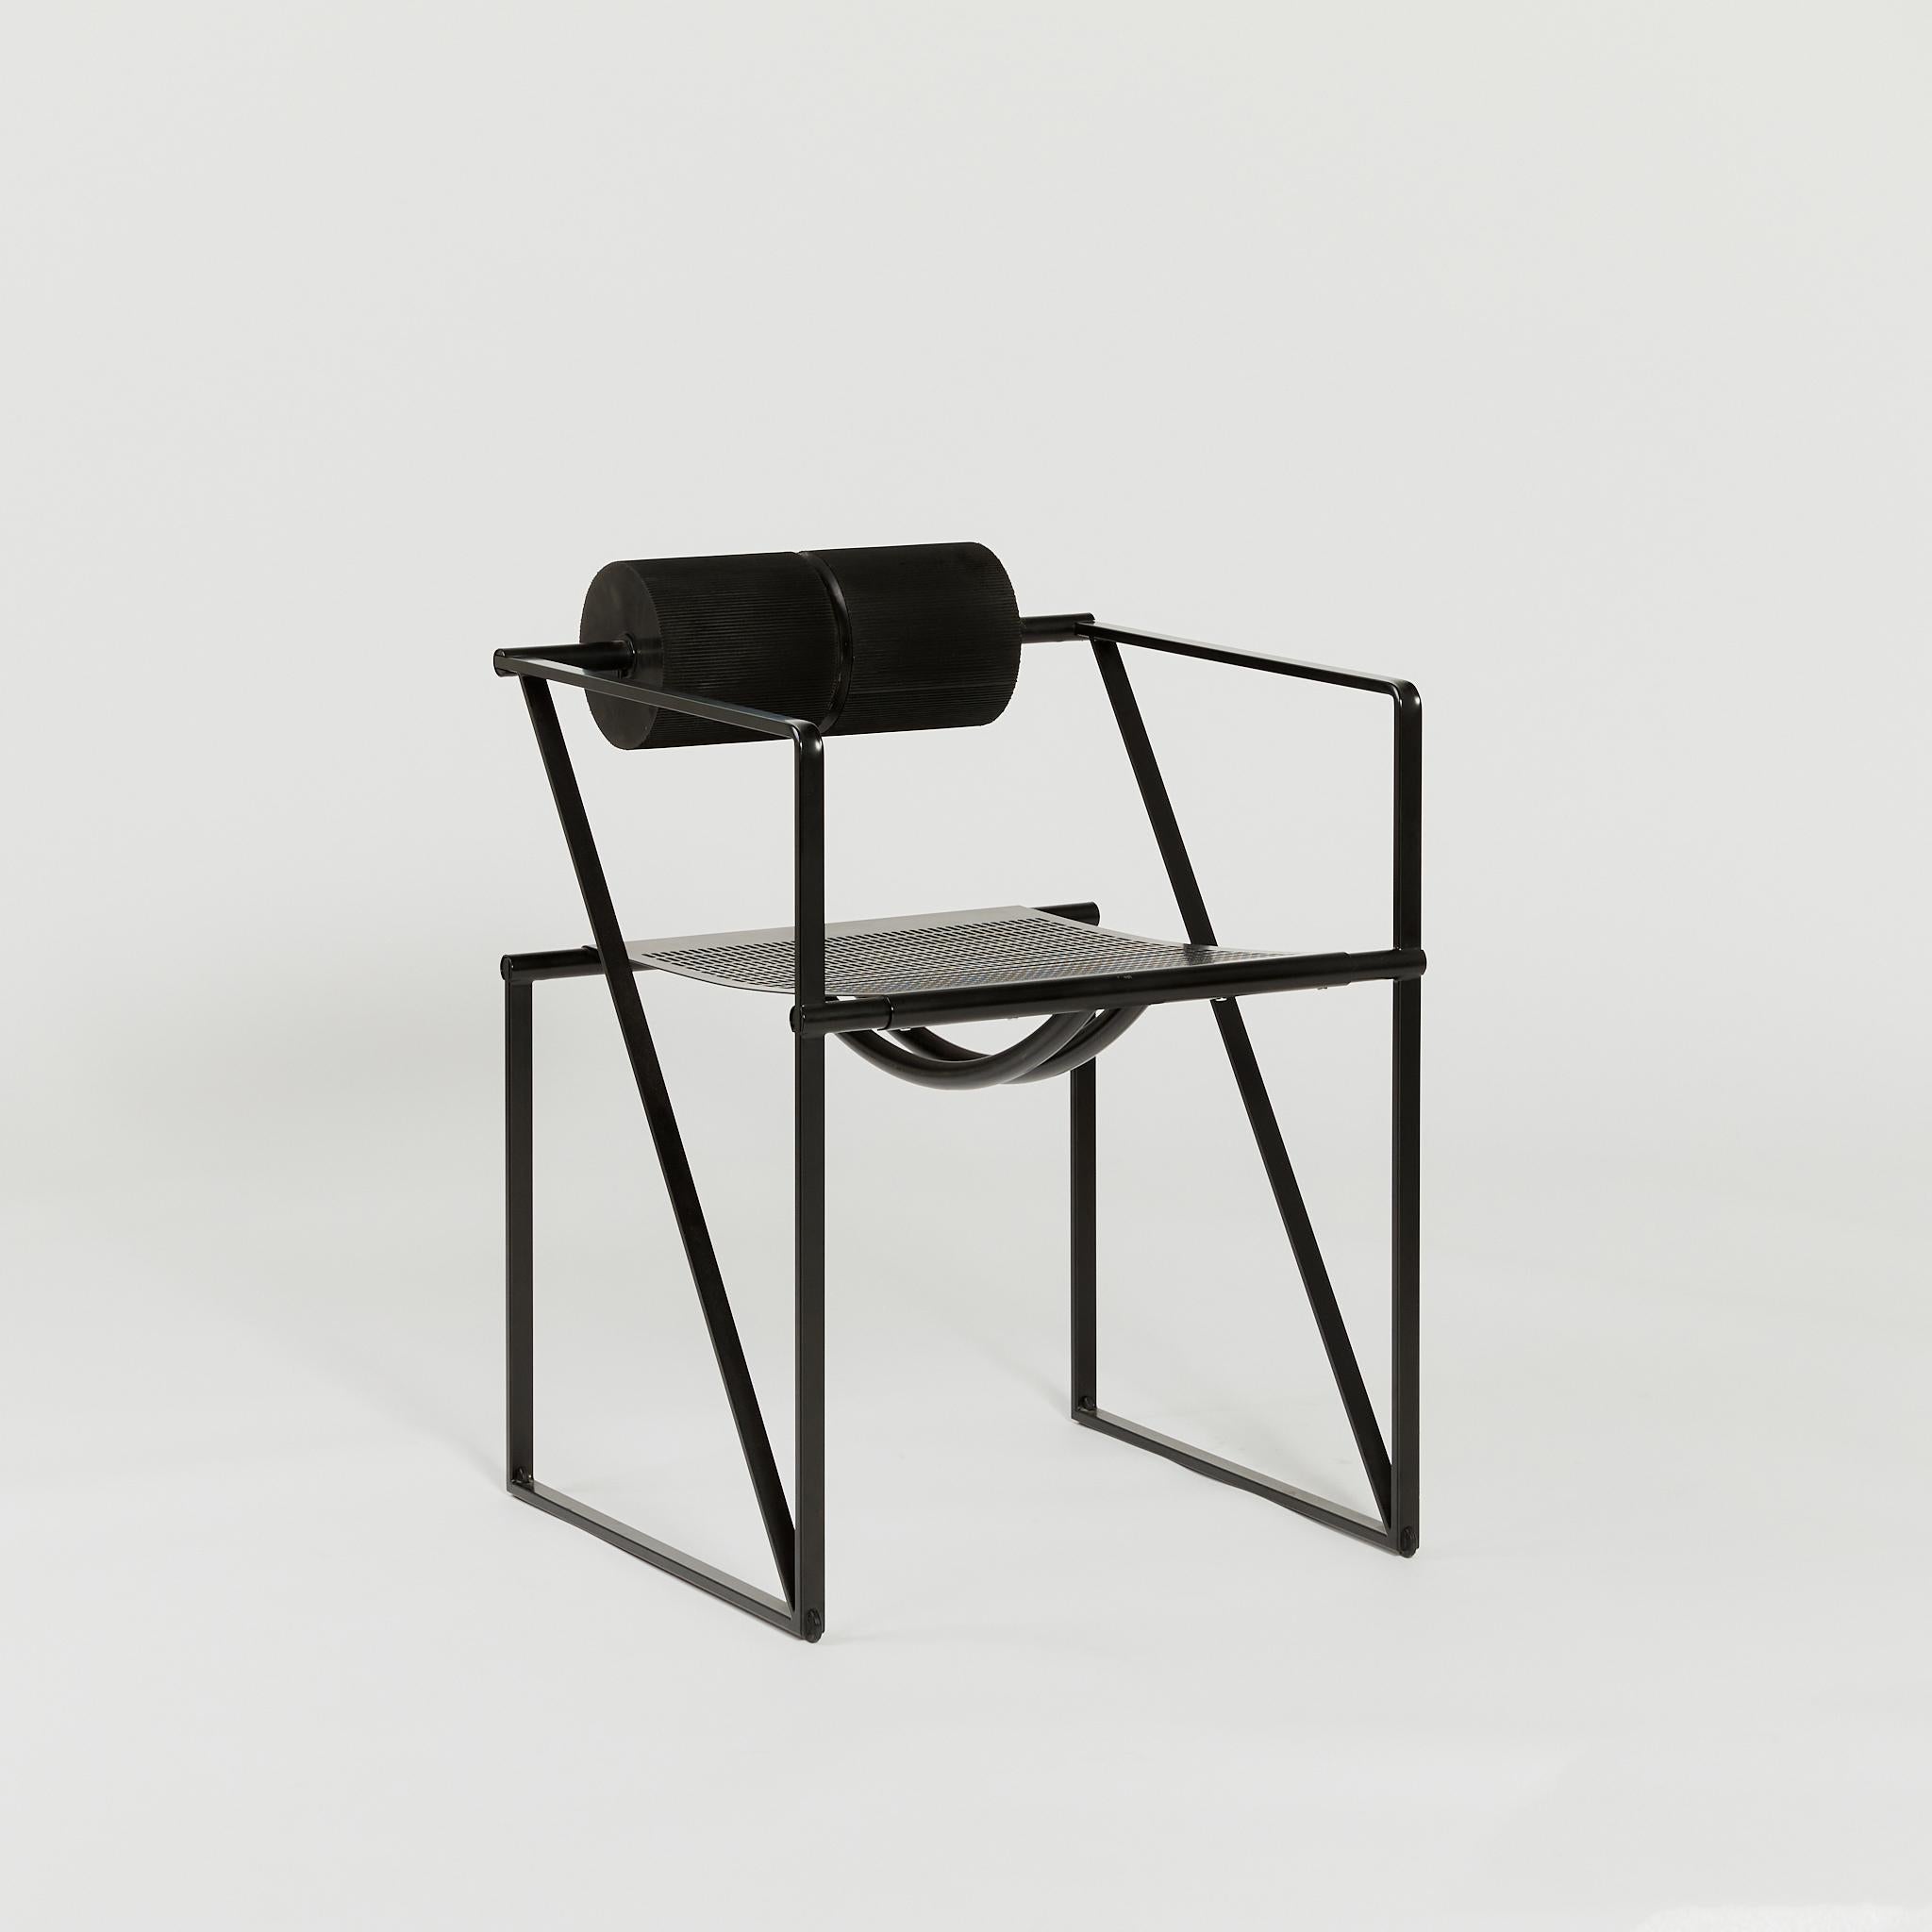 The iconic Seconda chair is constructed with a cube steel frame and ribbed foam back-rest. 

Born in 1943 in Mendrisio, Switzerland, award-winning architect-designer Mario Botta has built an international reputation for striking postmodern public